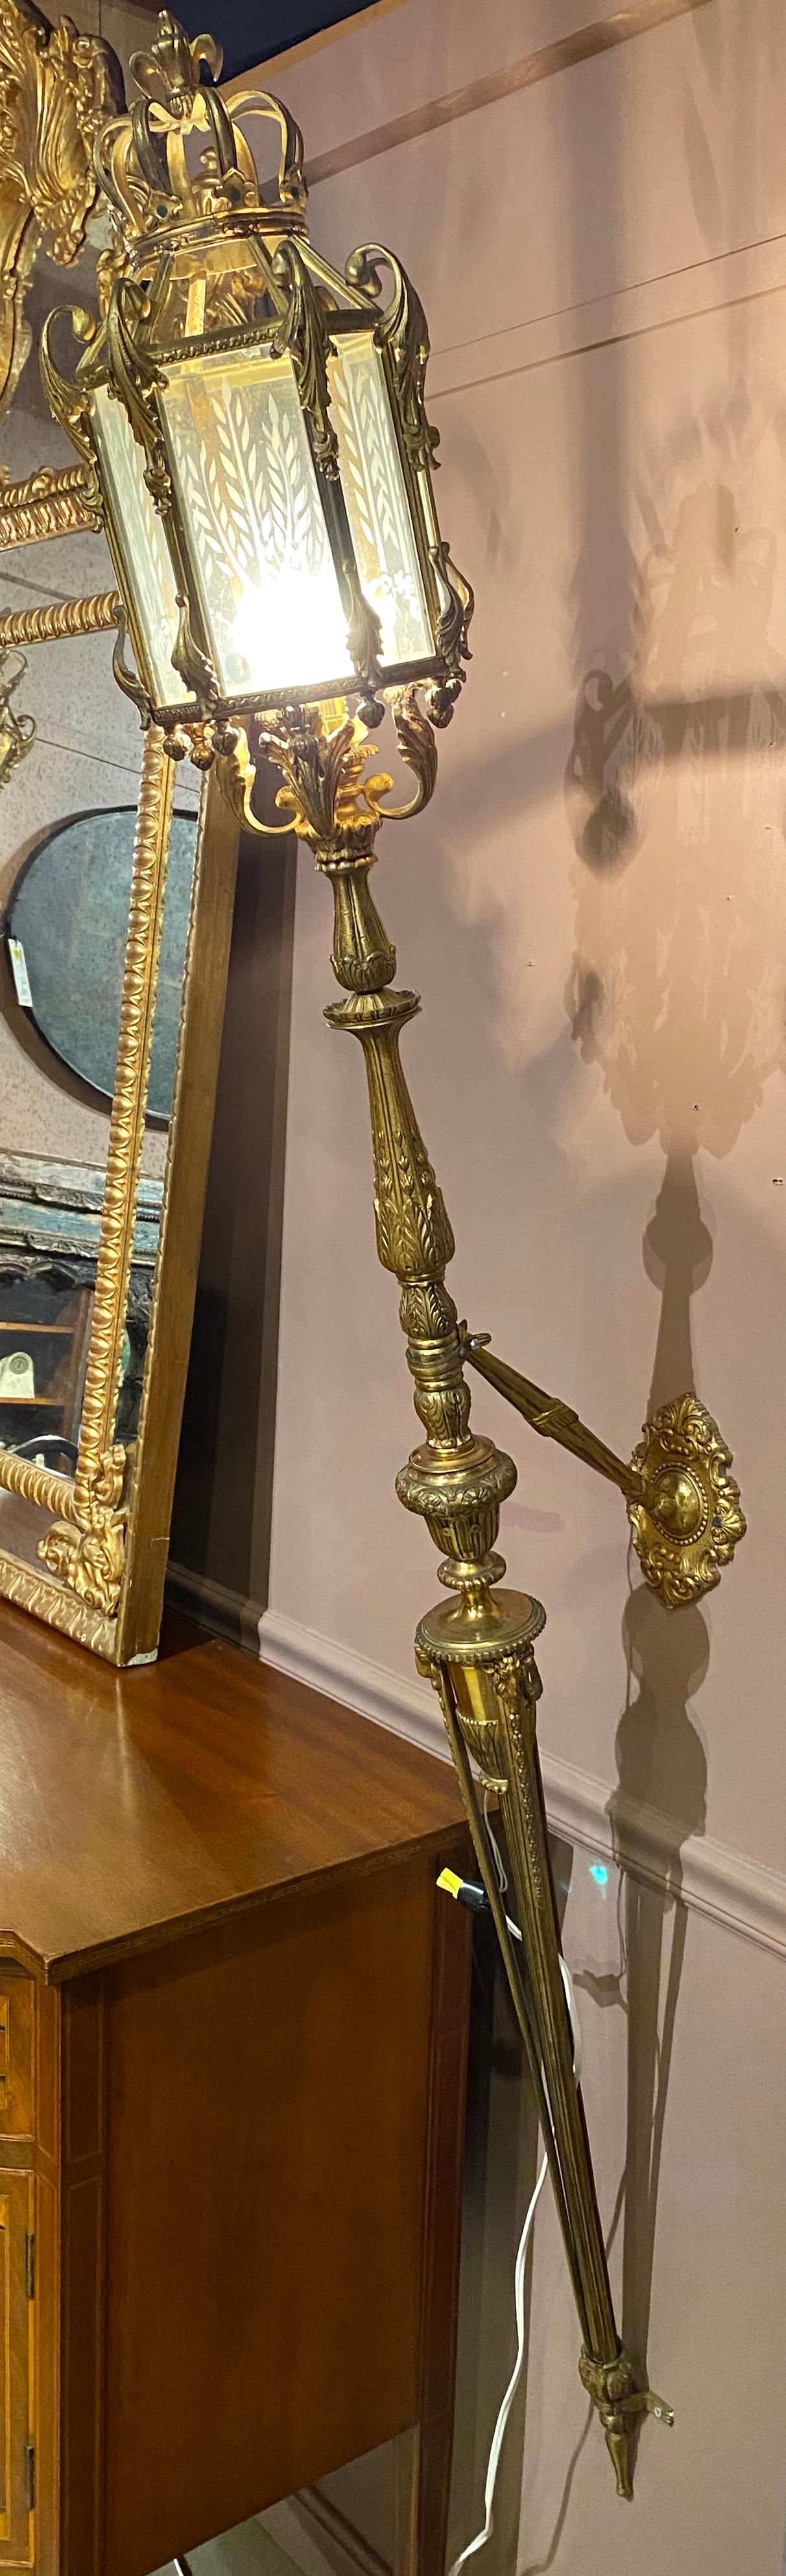 A fine pair of Spanish wall mounted scroll decorated brass single light torchieres with etched glass panels, decorative brass stems, wall mounts and base supports. This pair date to the early 20th century in very good working condition, with minor